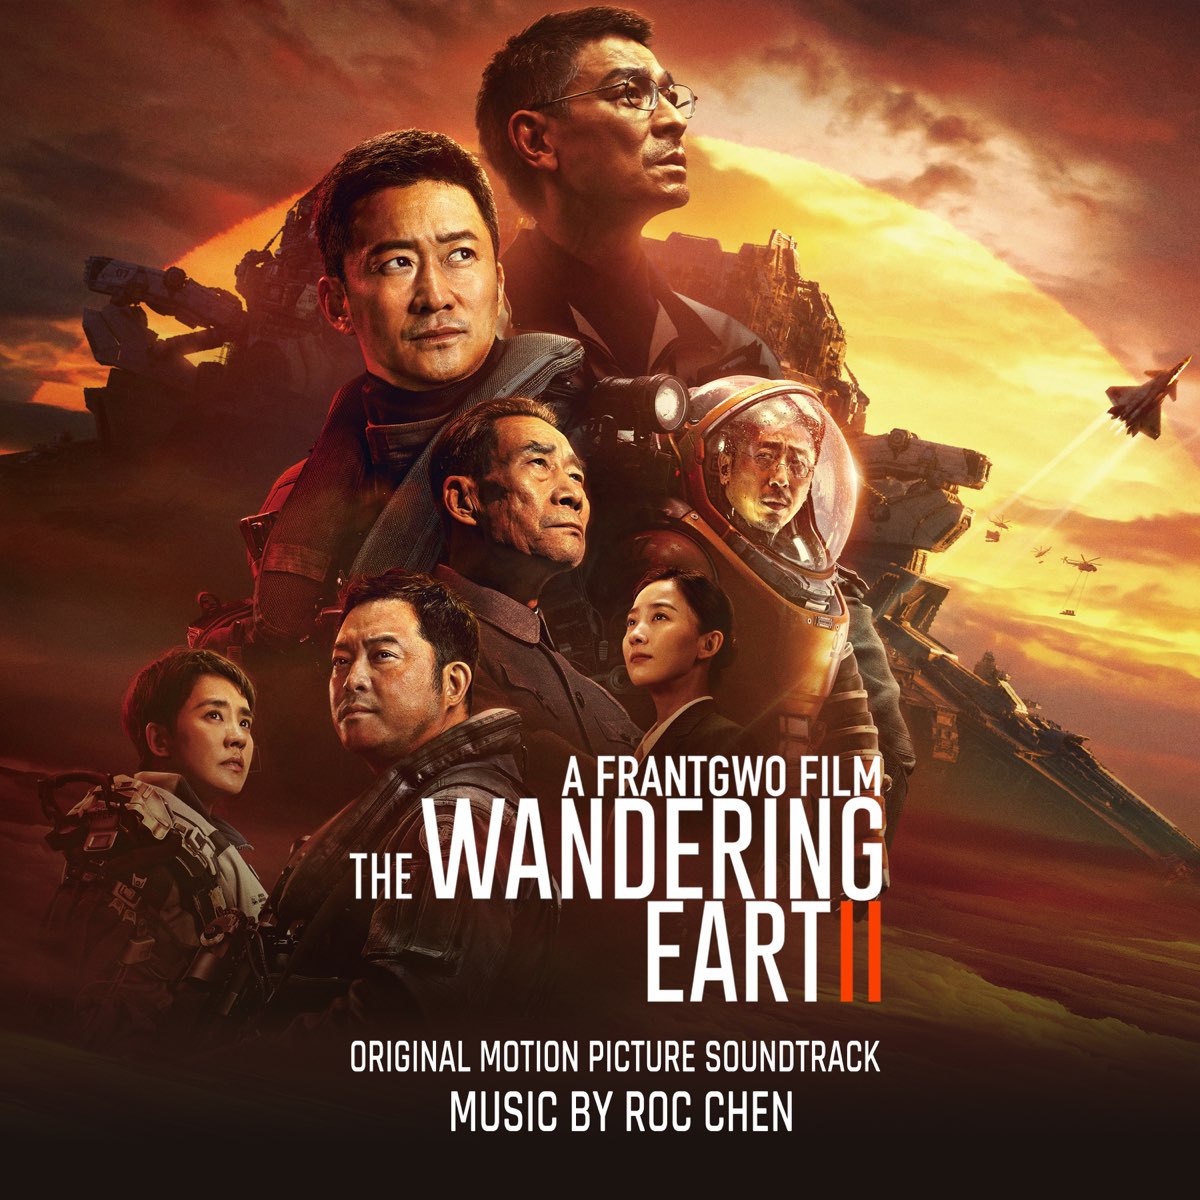 ‎The Wandering Earth 2 (Original Motion Picture Soundtrack) by Roc Chen